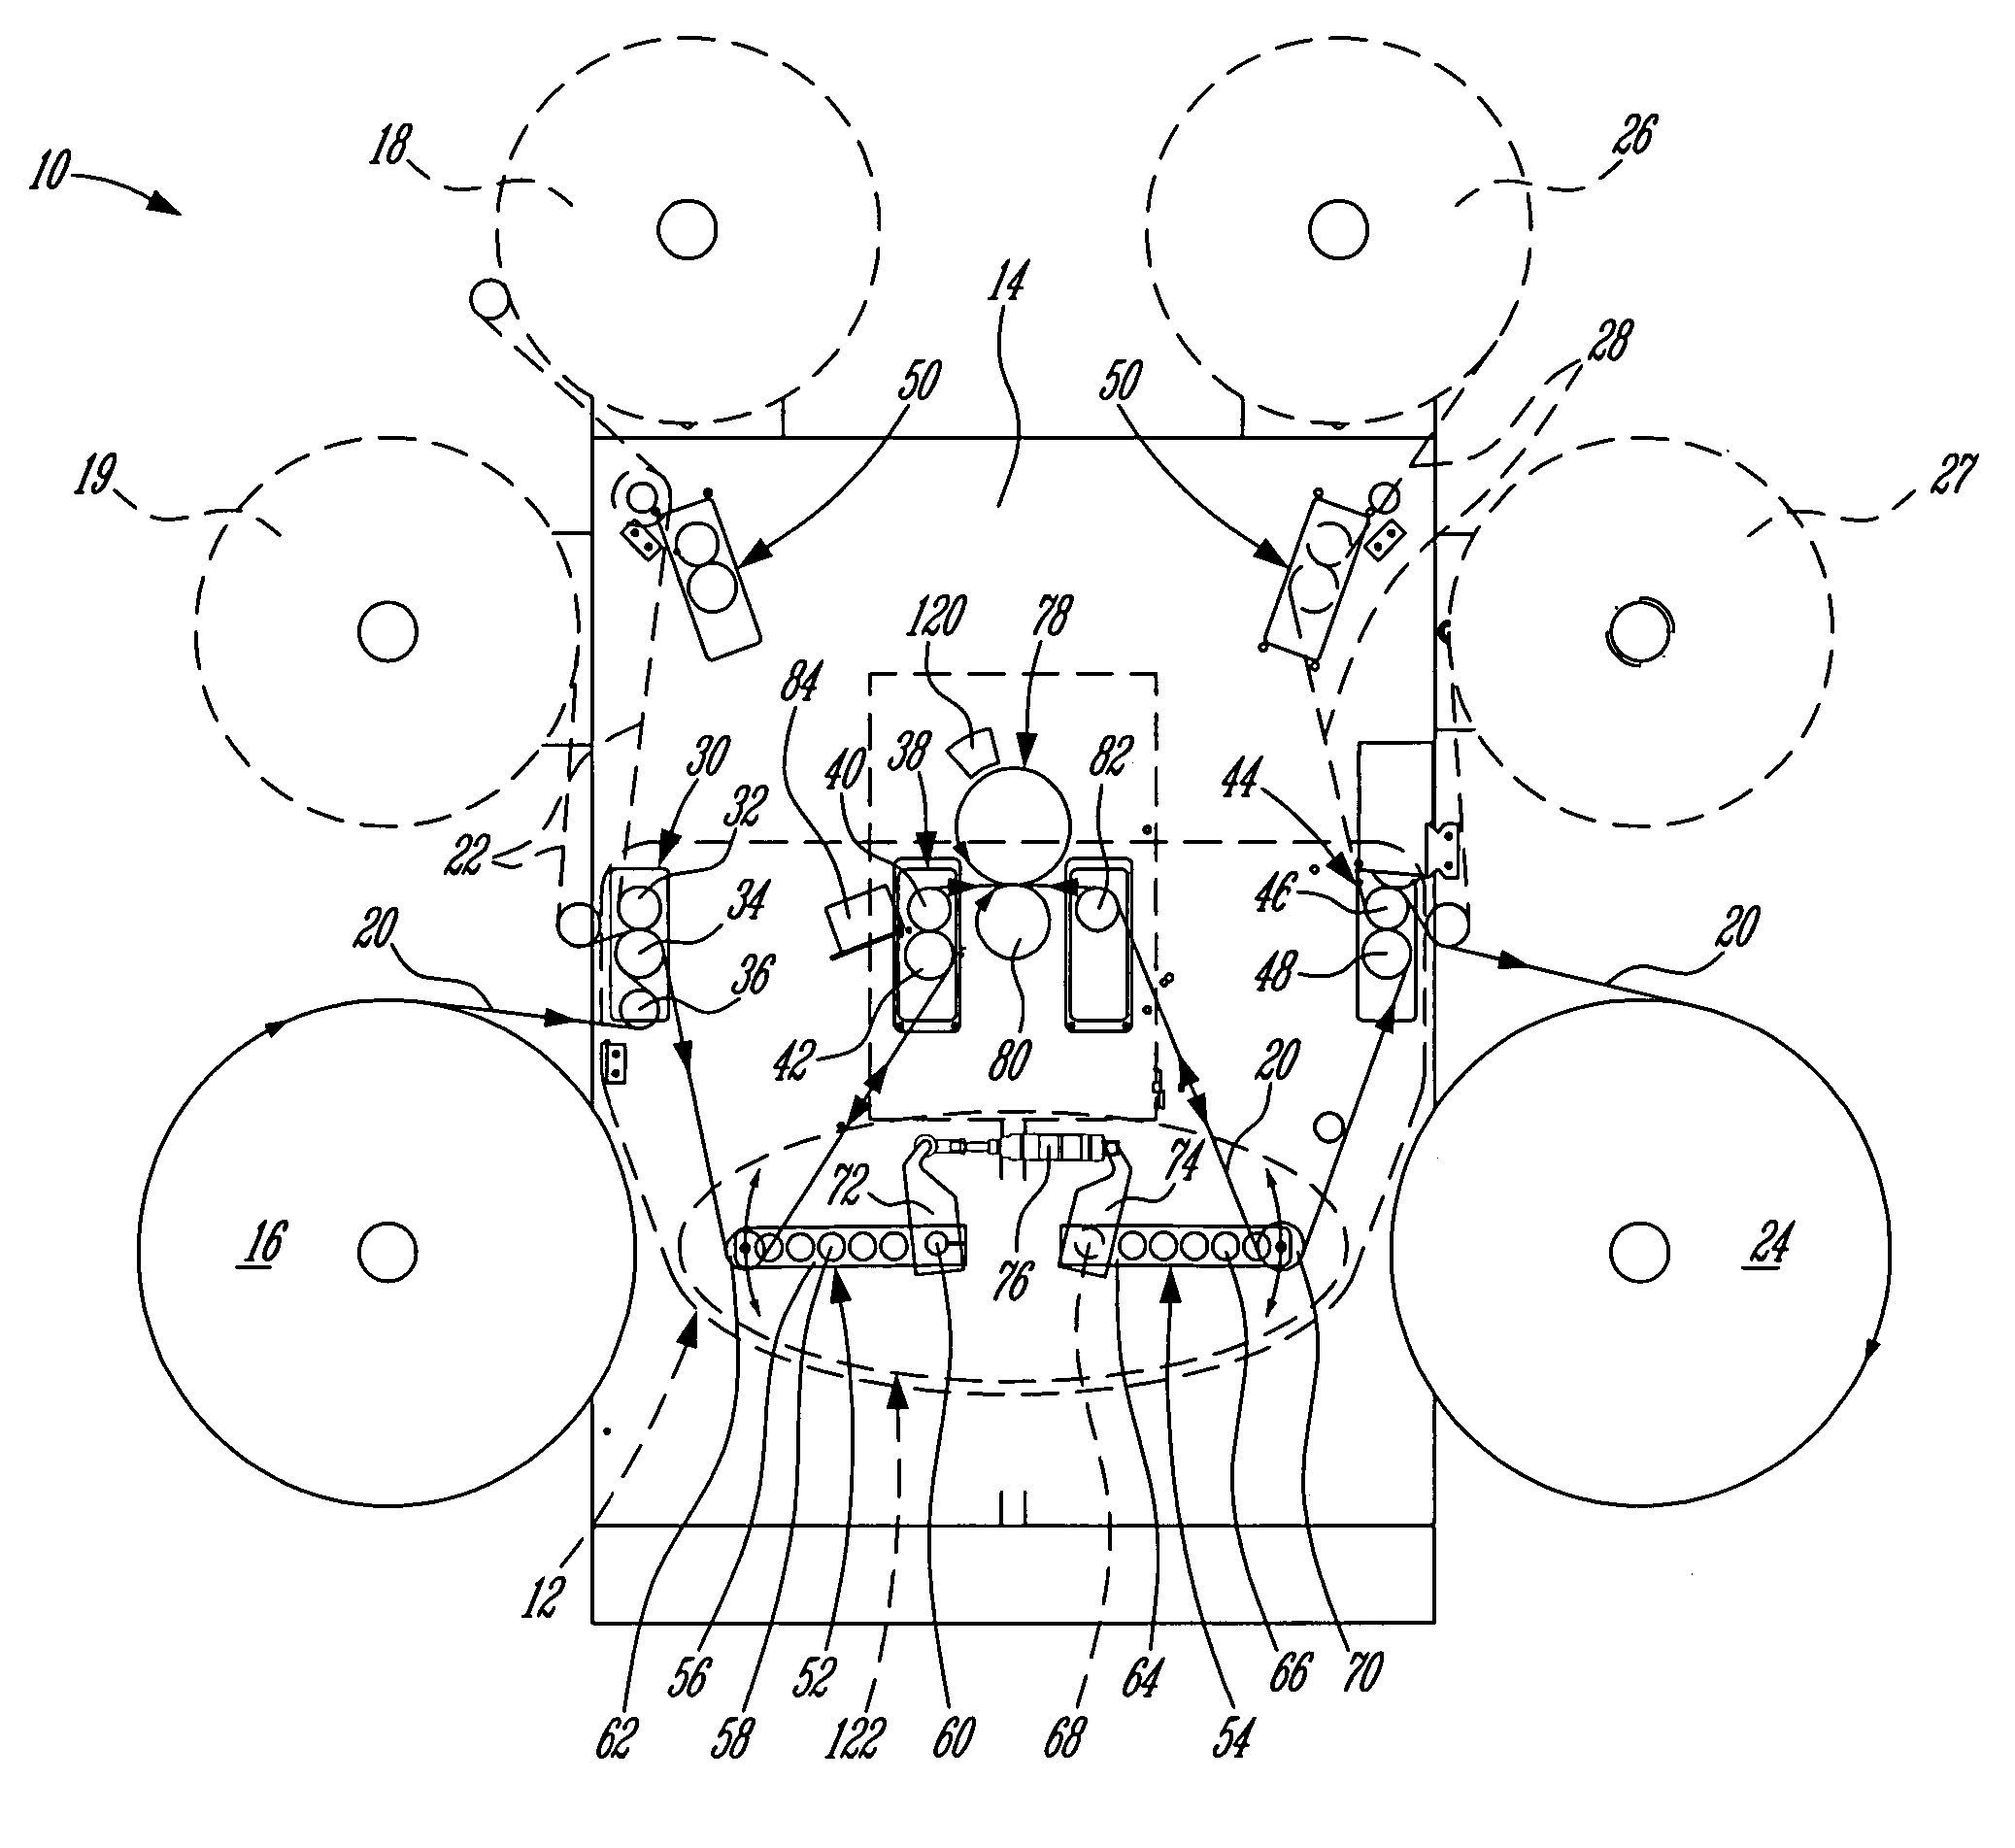 Tension-controlled web processing machine and method